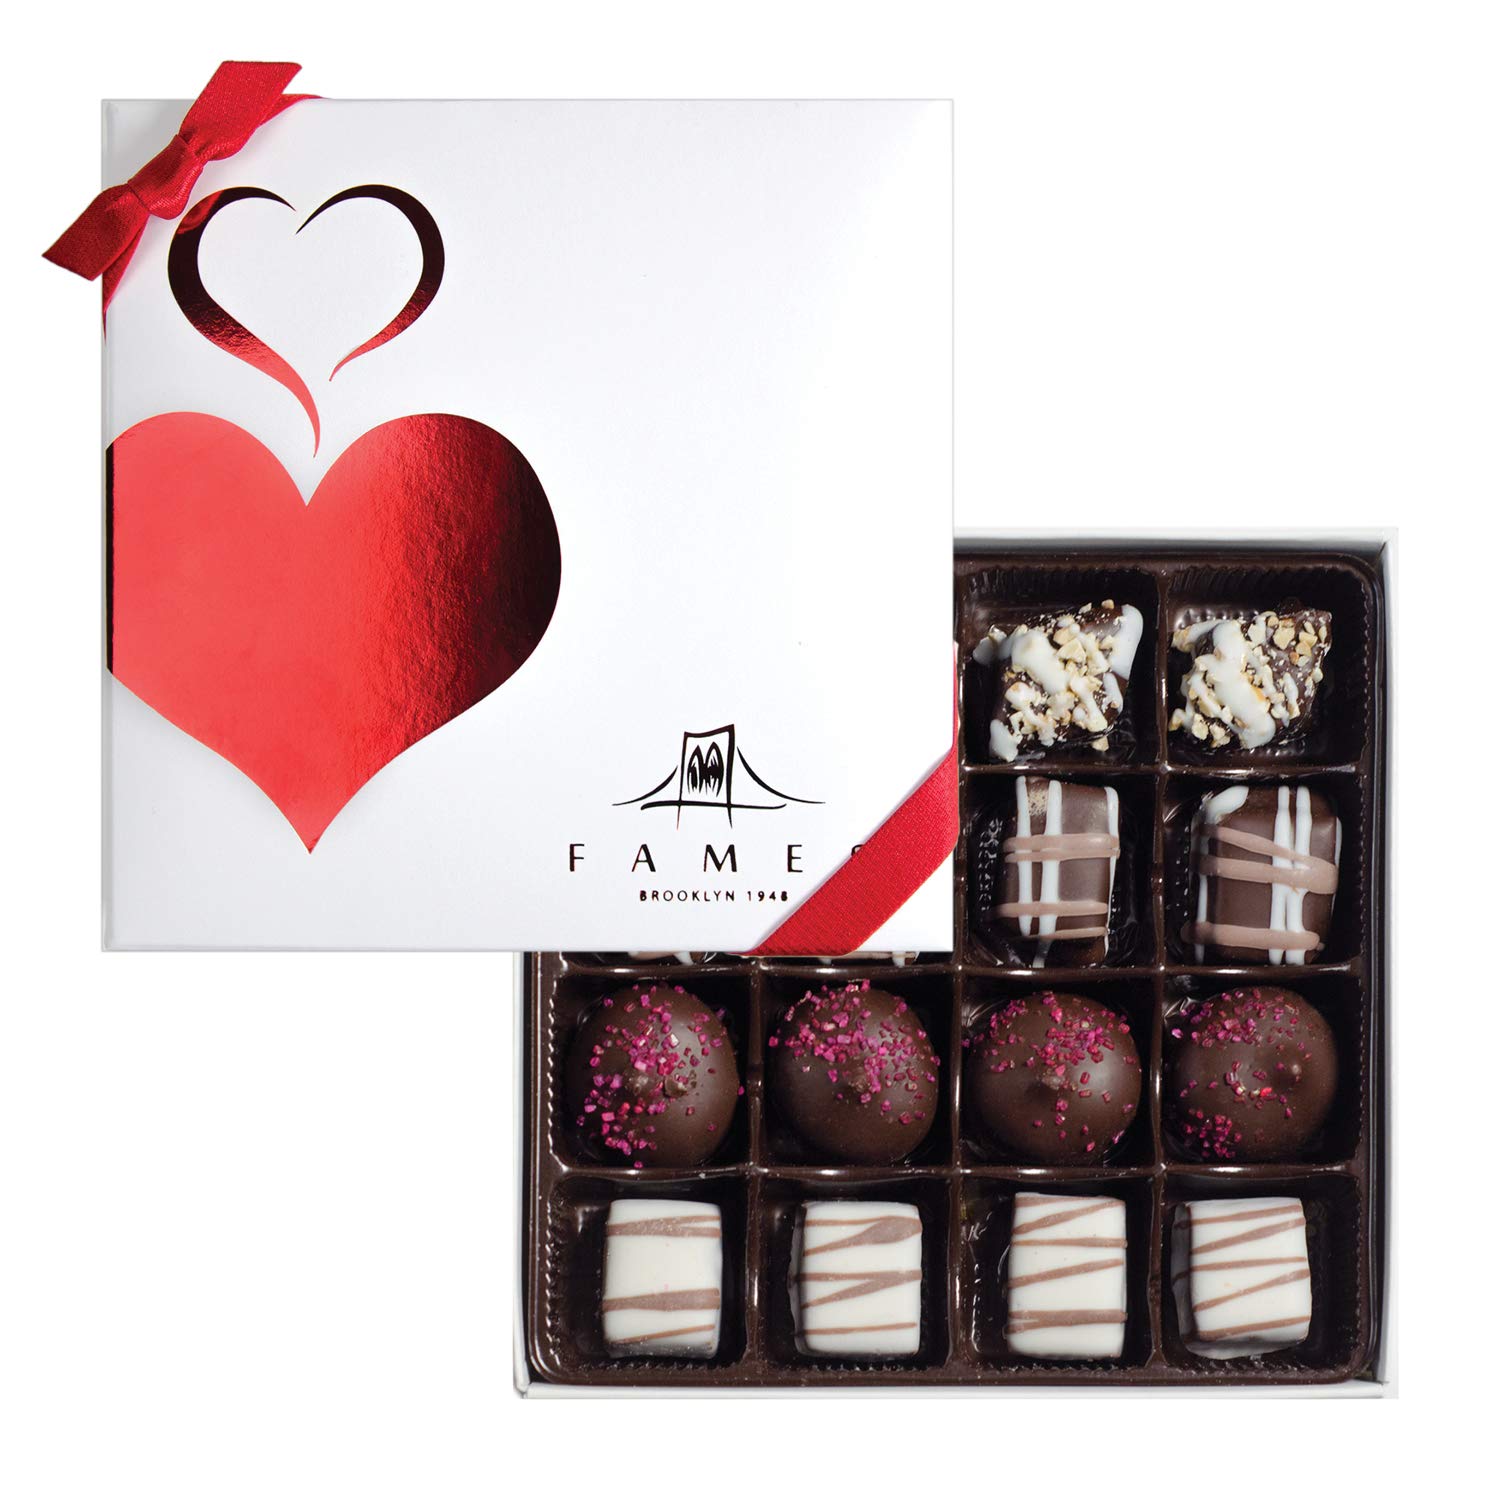 7. Fames Assorted Chocolate Gift Box